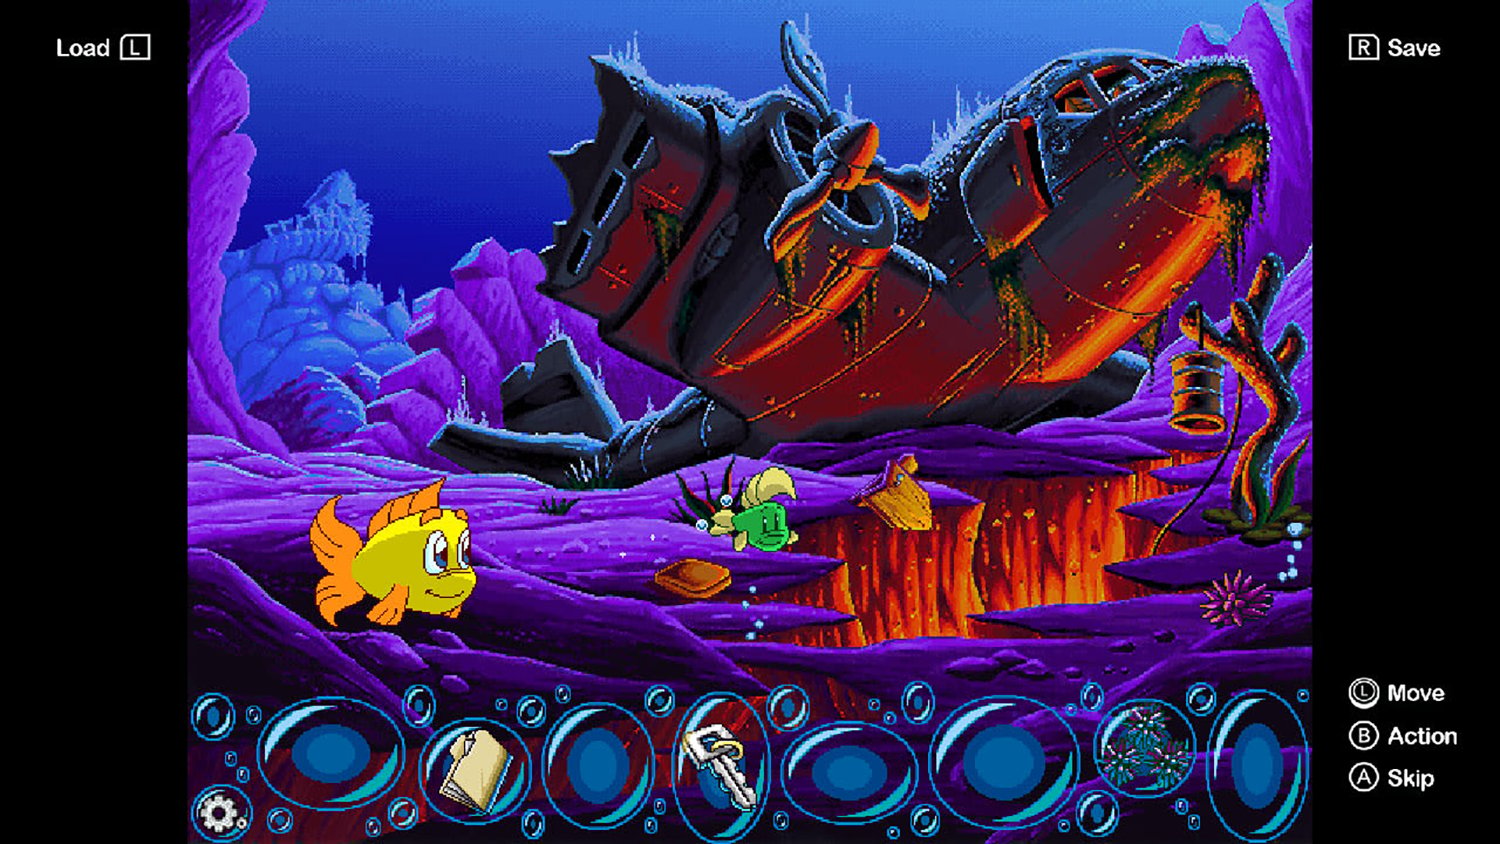 Freddi Fish approaches a shipwreck in Freddi Fish 3: The Case of the Stolen Conch Shell, coming soon to Nintendo Switch